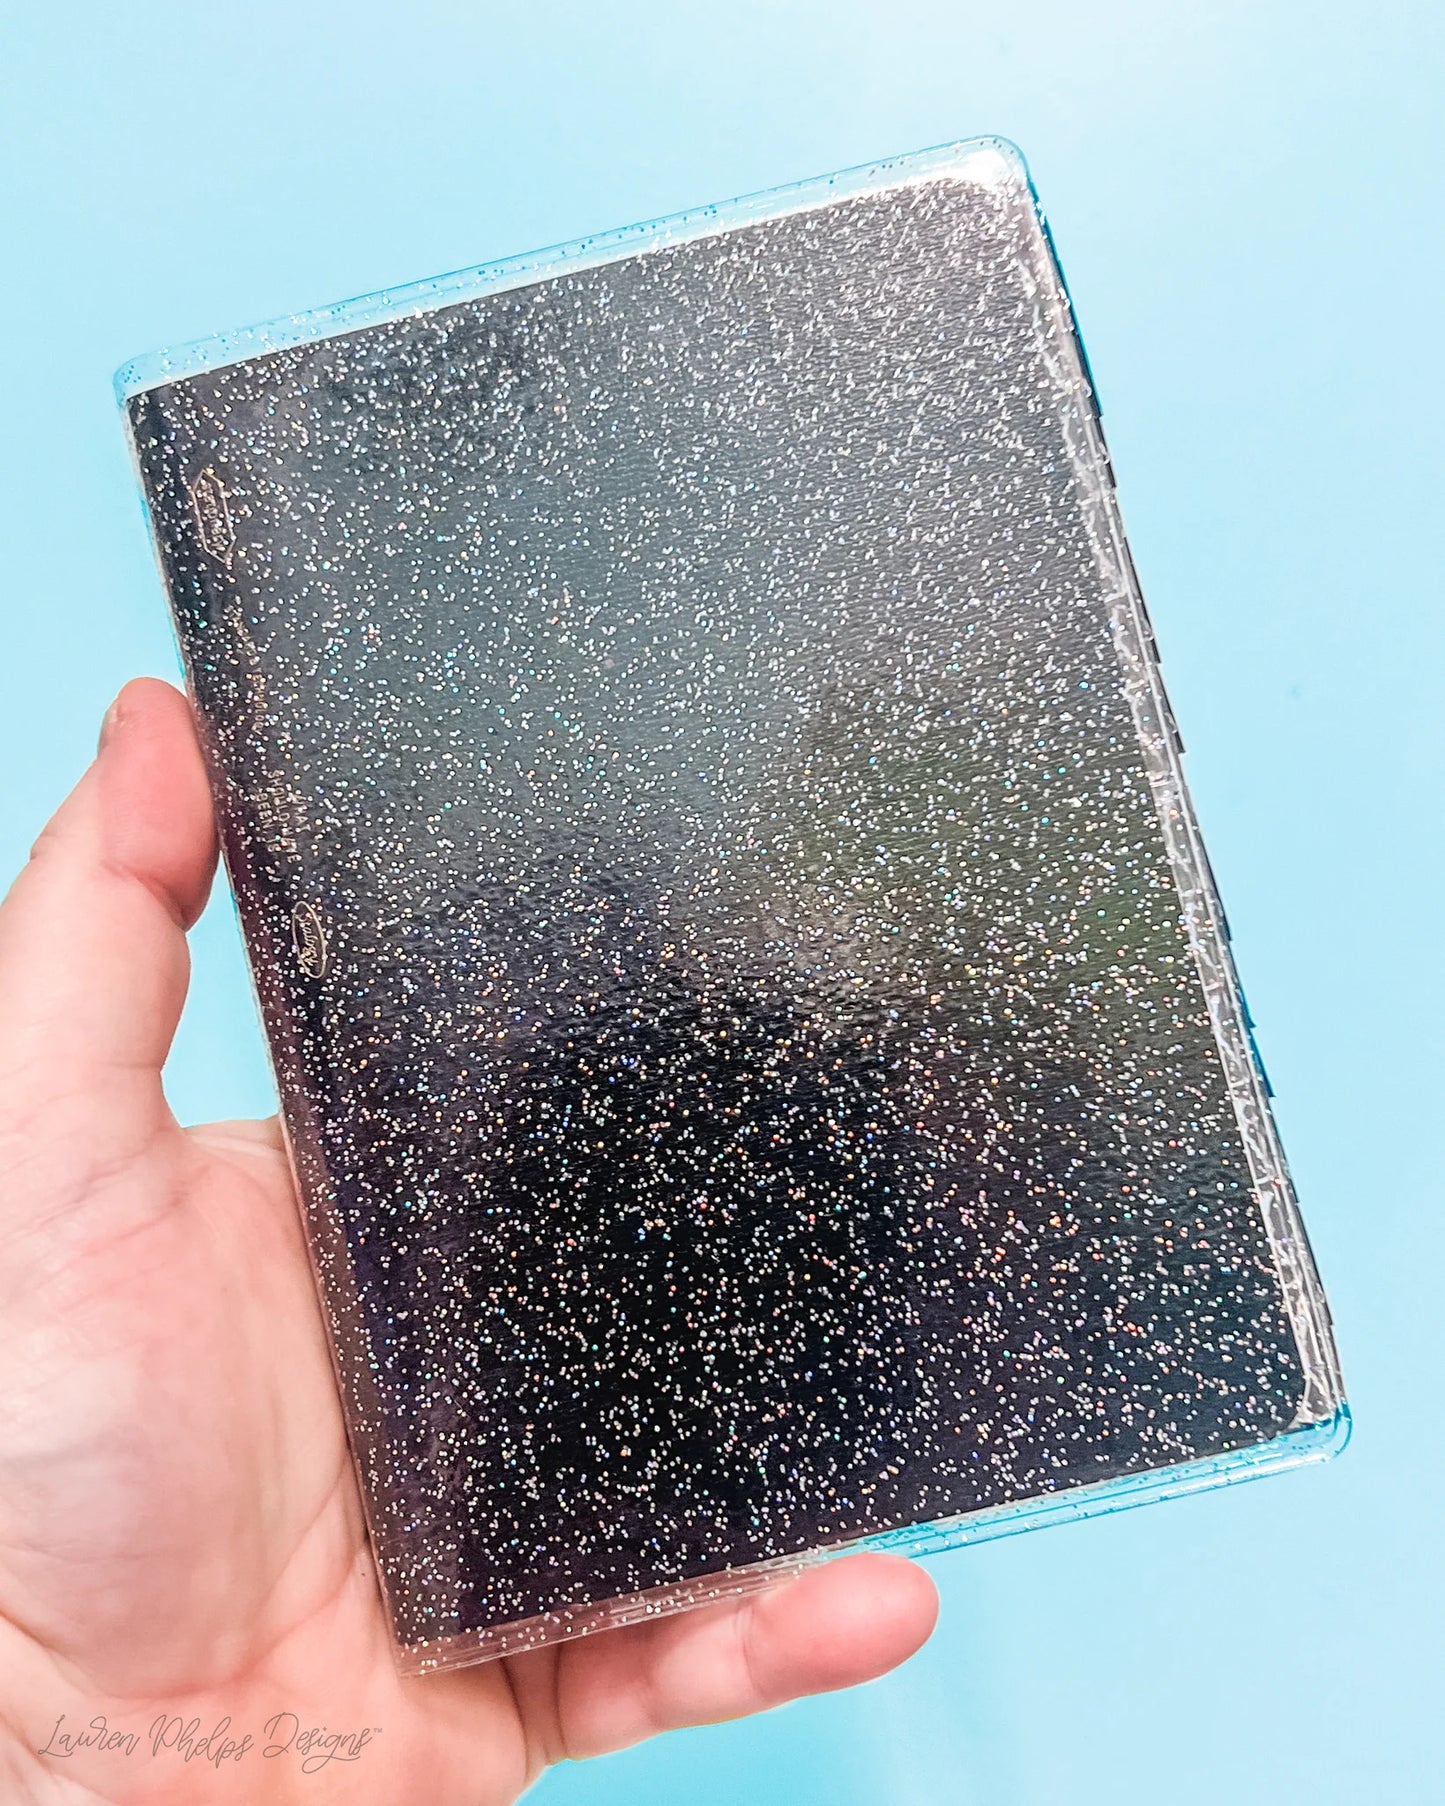 Silver Holographic Glitter Soft Vinyl Cover